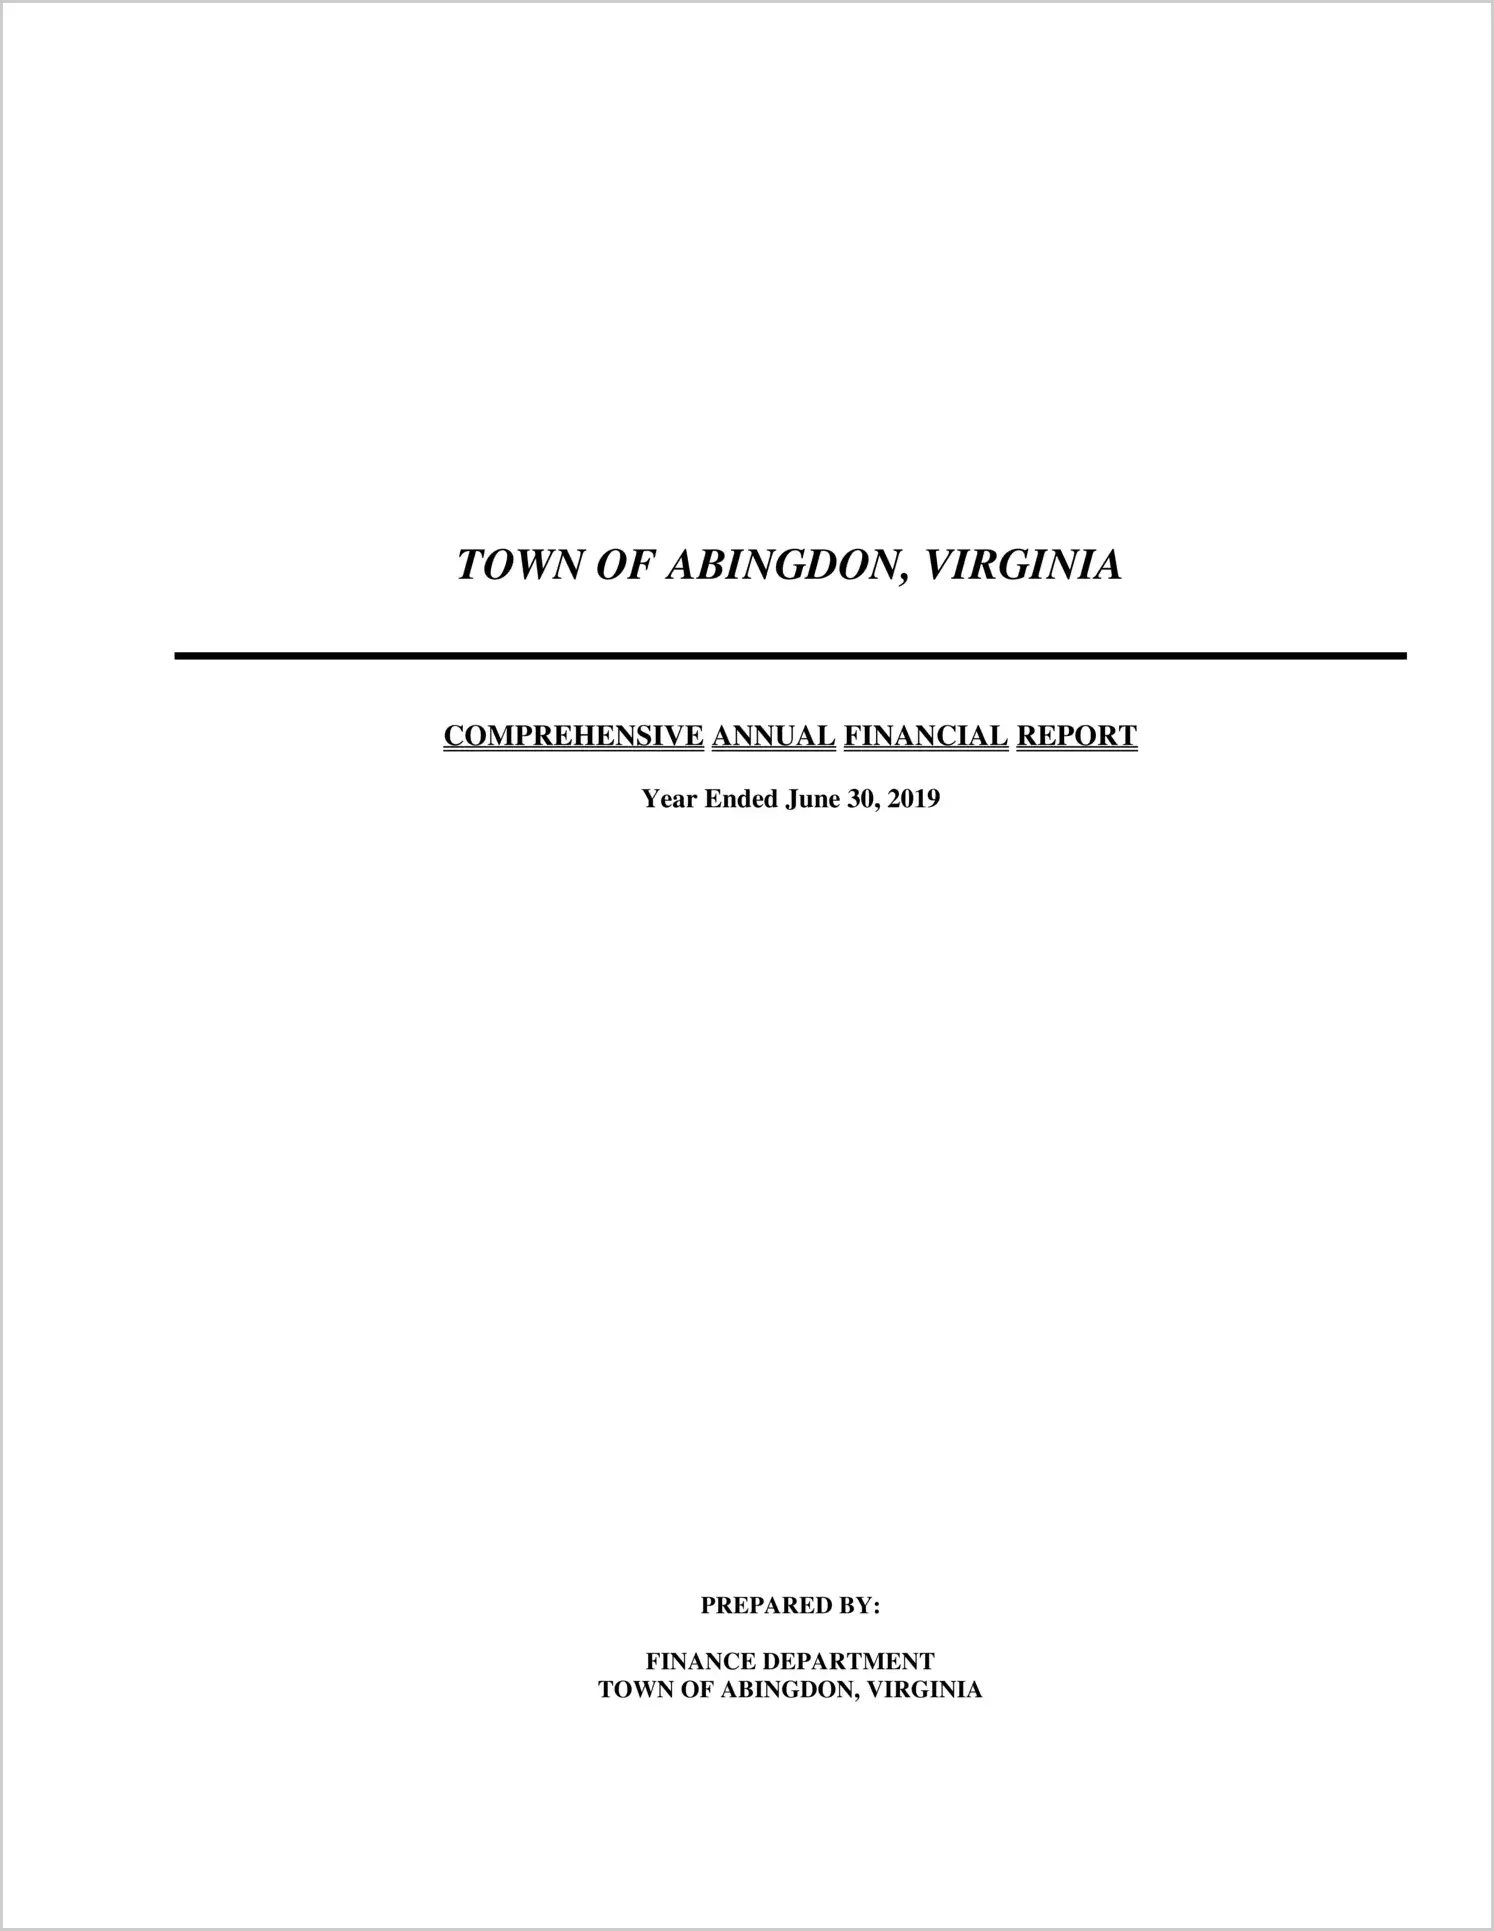 2019 Annual Financial Report for Town of Abingdon